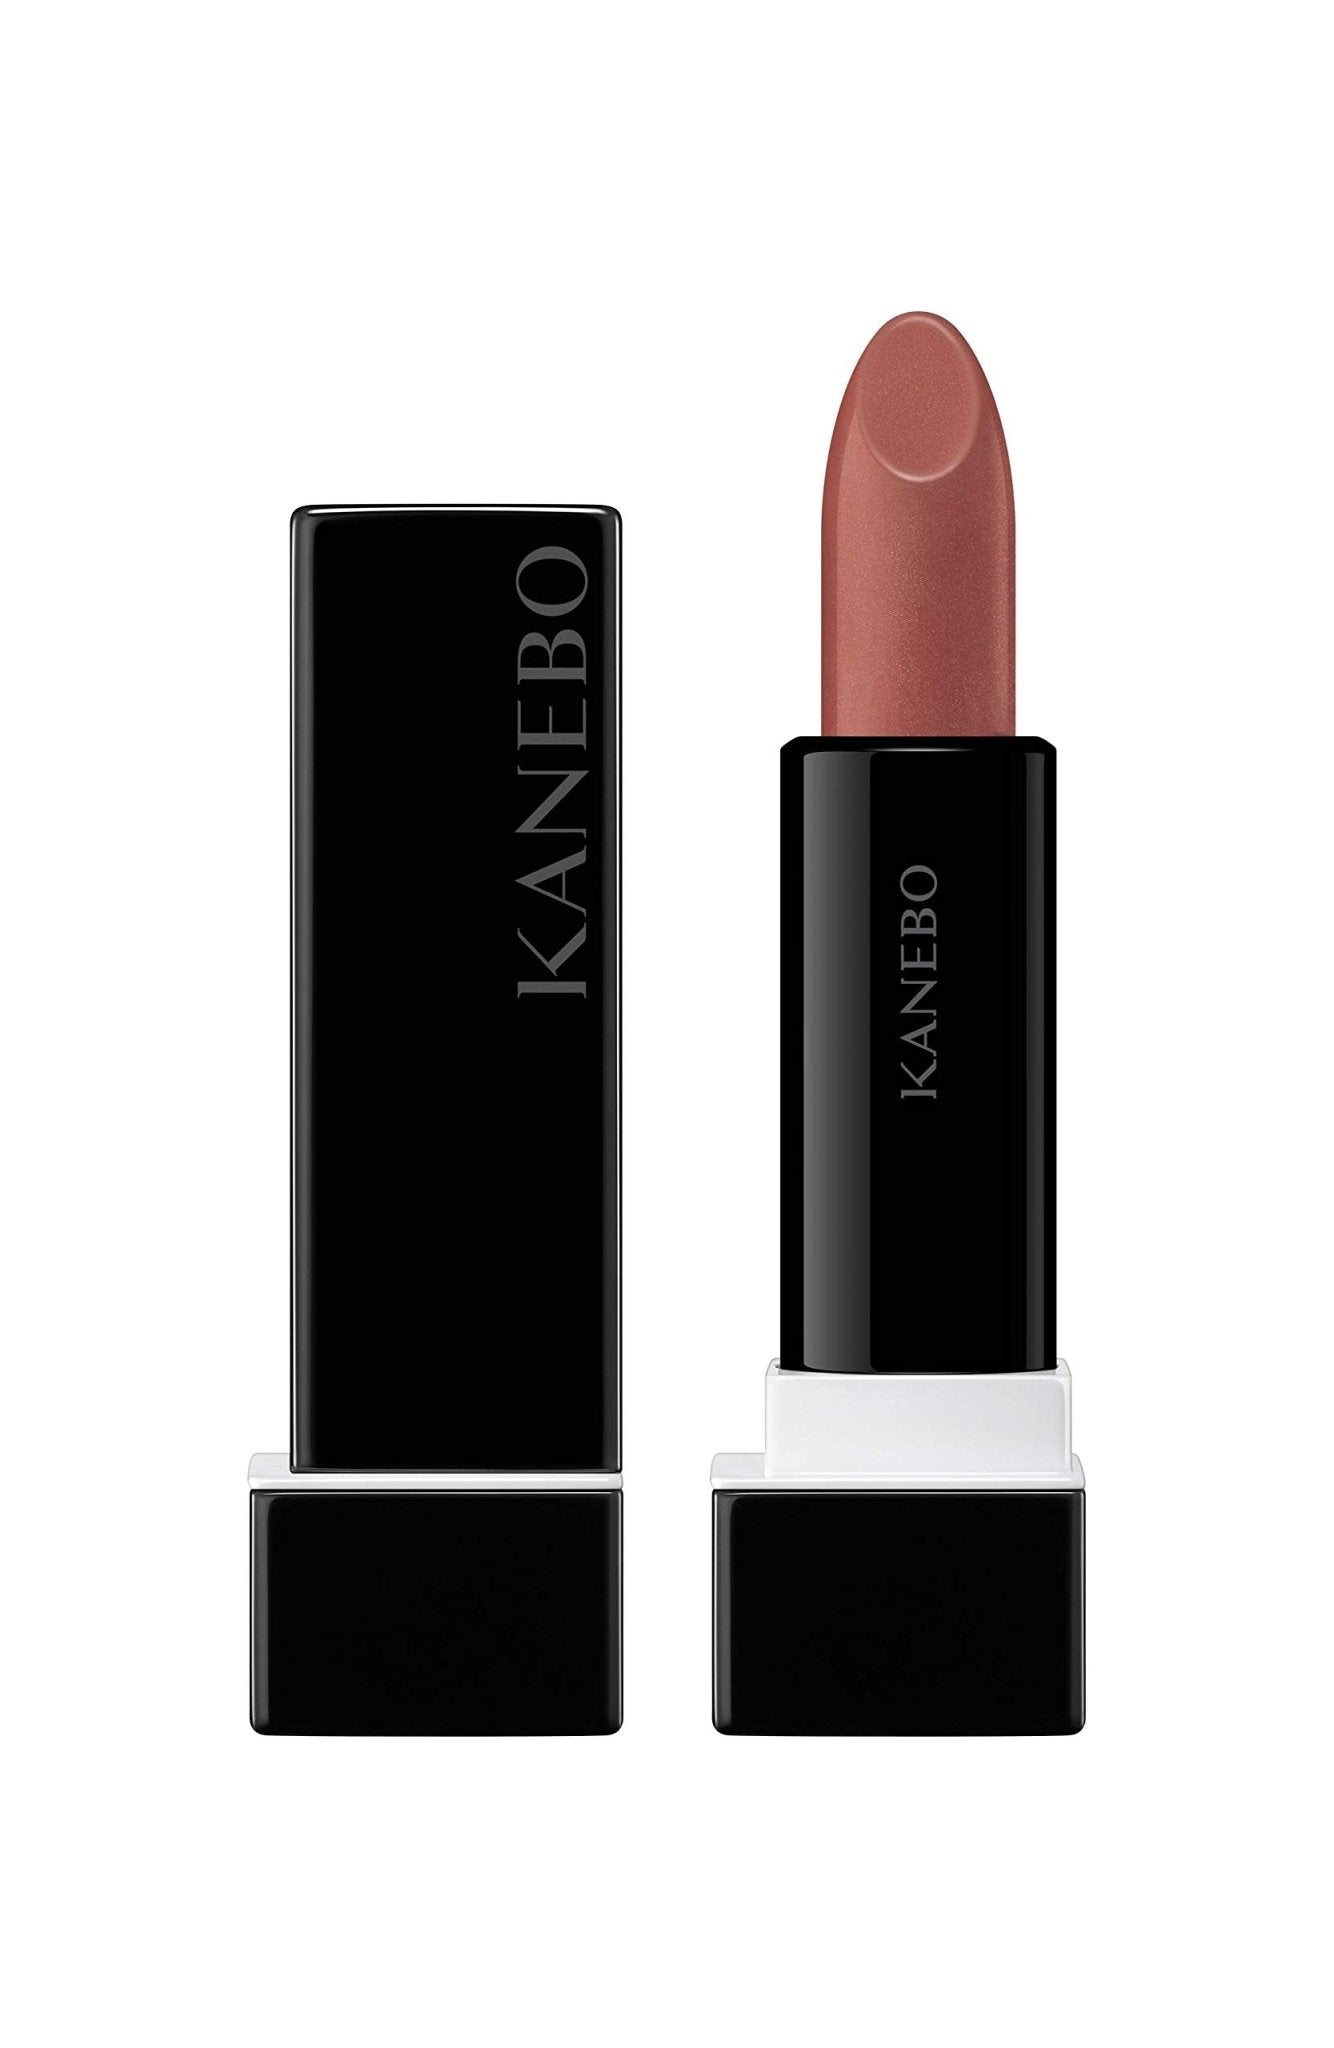 Kanebo N - Rouge 152 Lipstick in Smile Red for Vibrant Lips